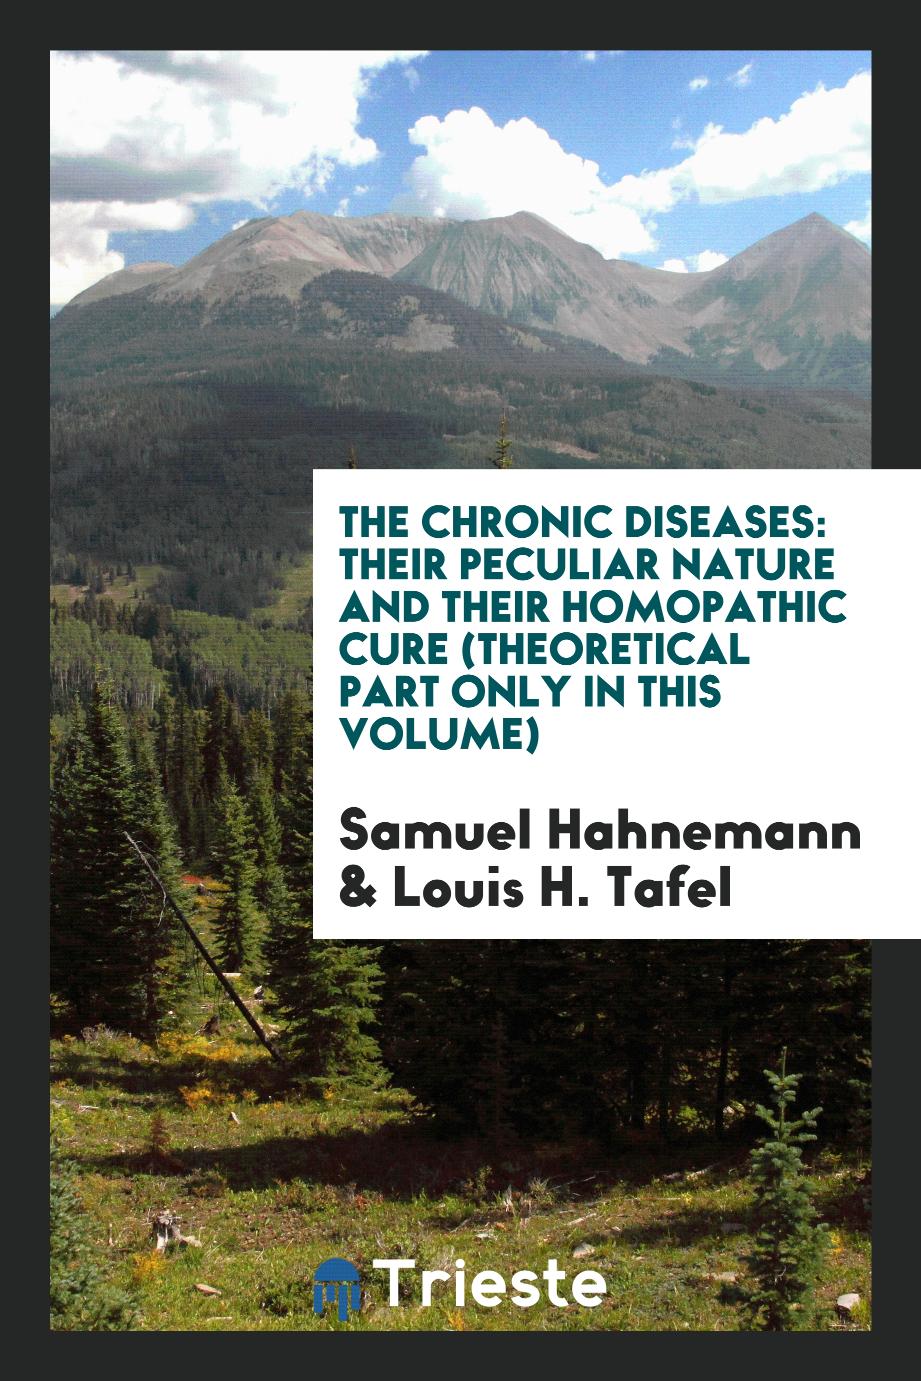 The chronic diseases: their peculiar nature and their homopathic cure (theoretical part only in this volume)